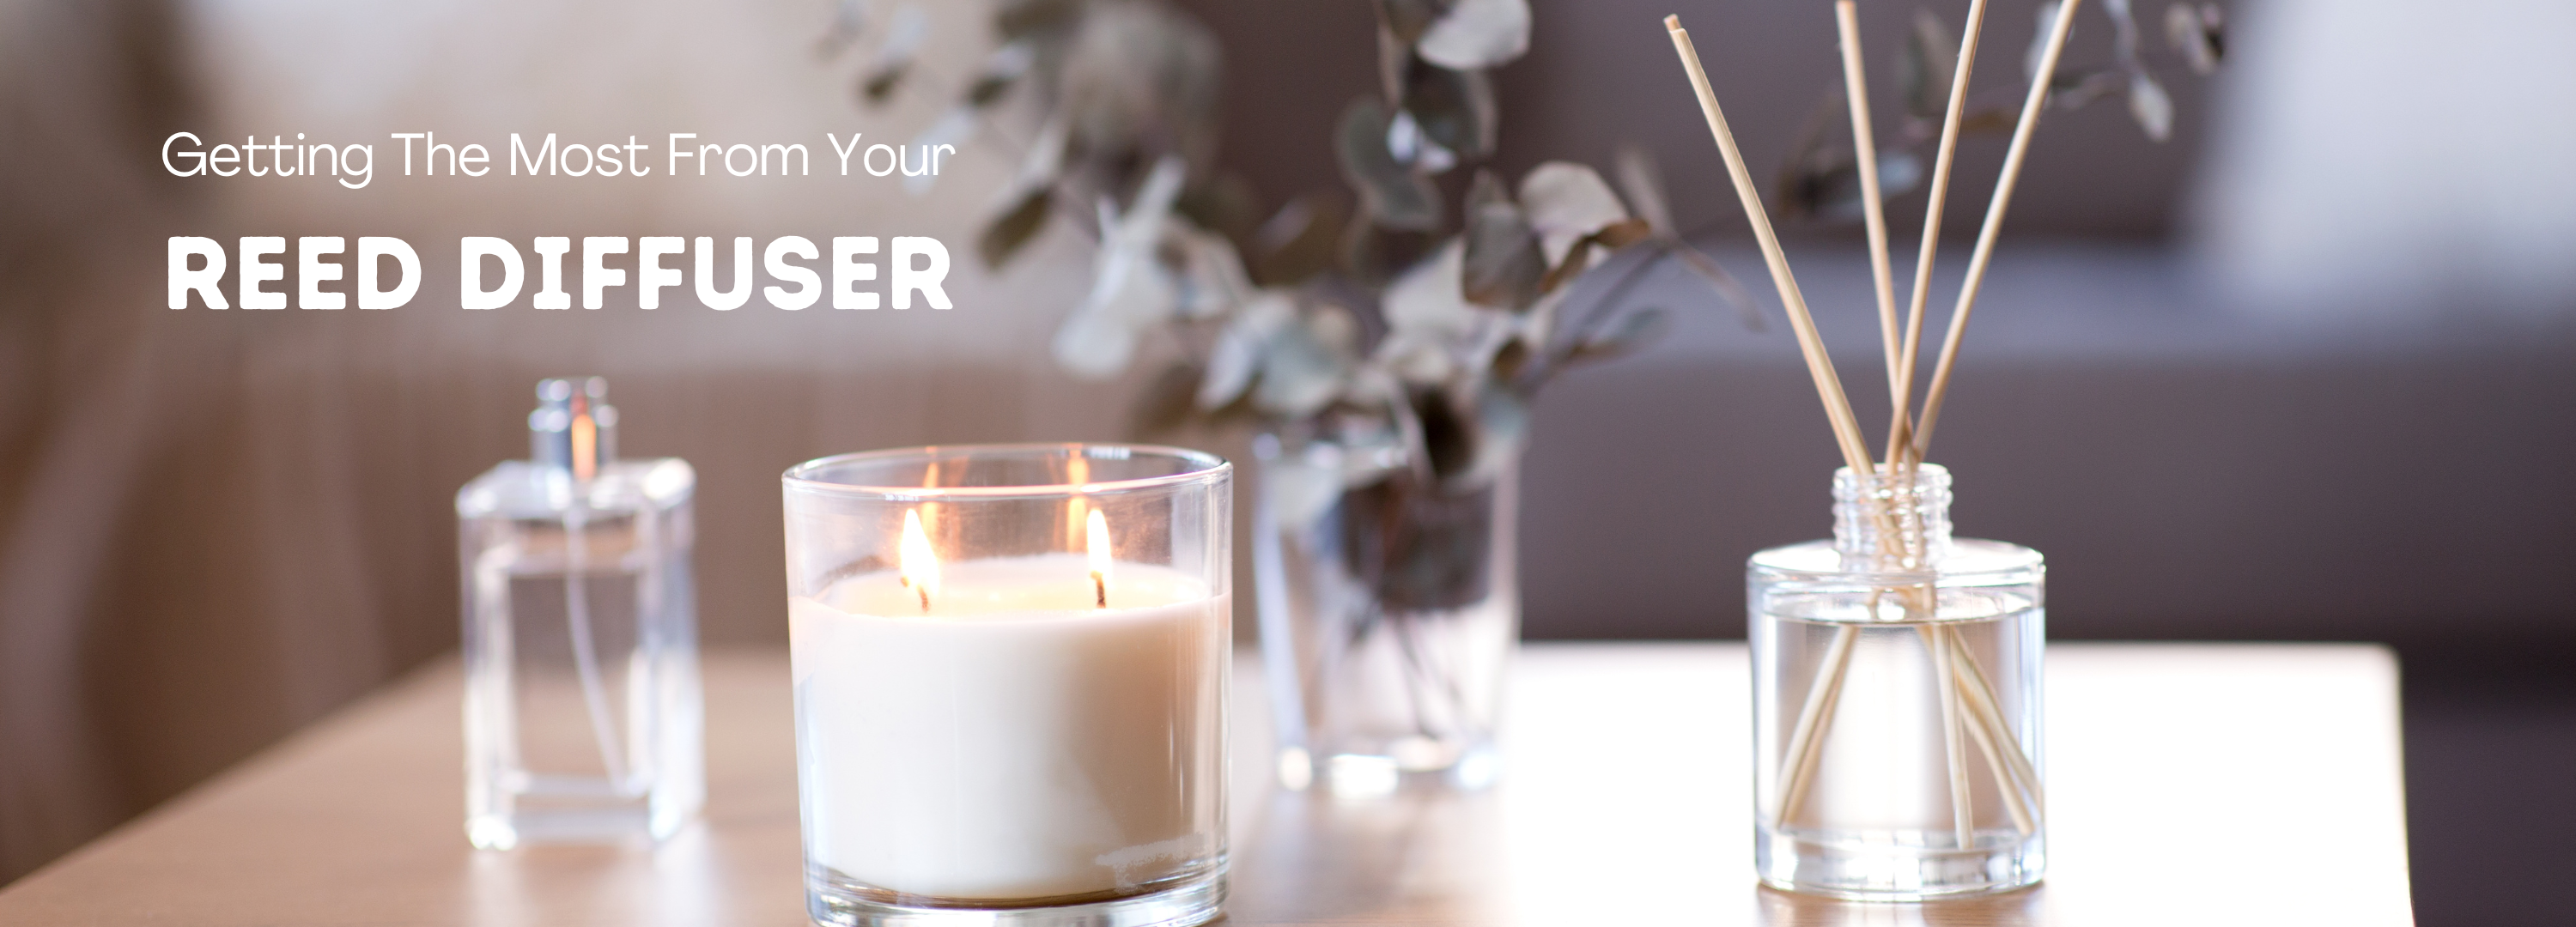 Getting The Most From Your Reed Diffuser